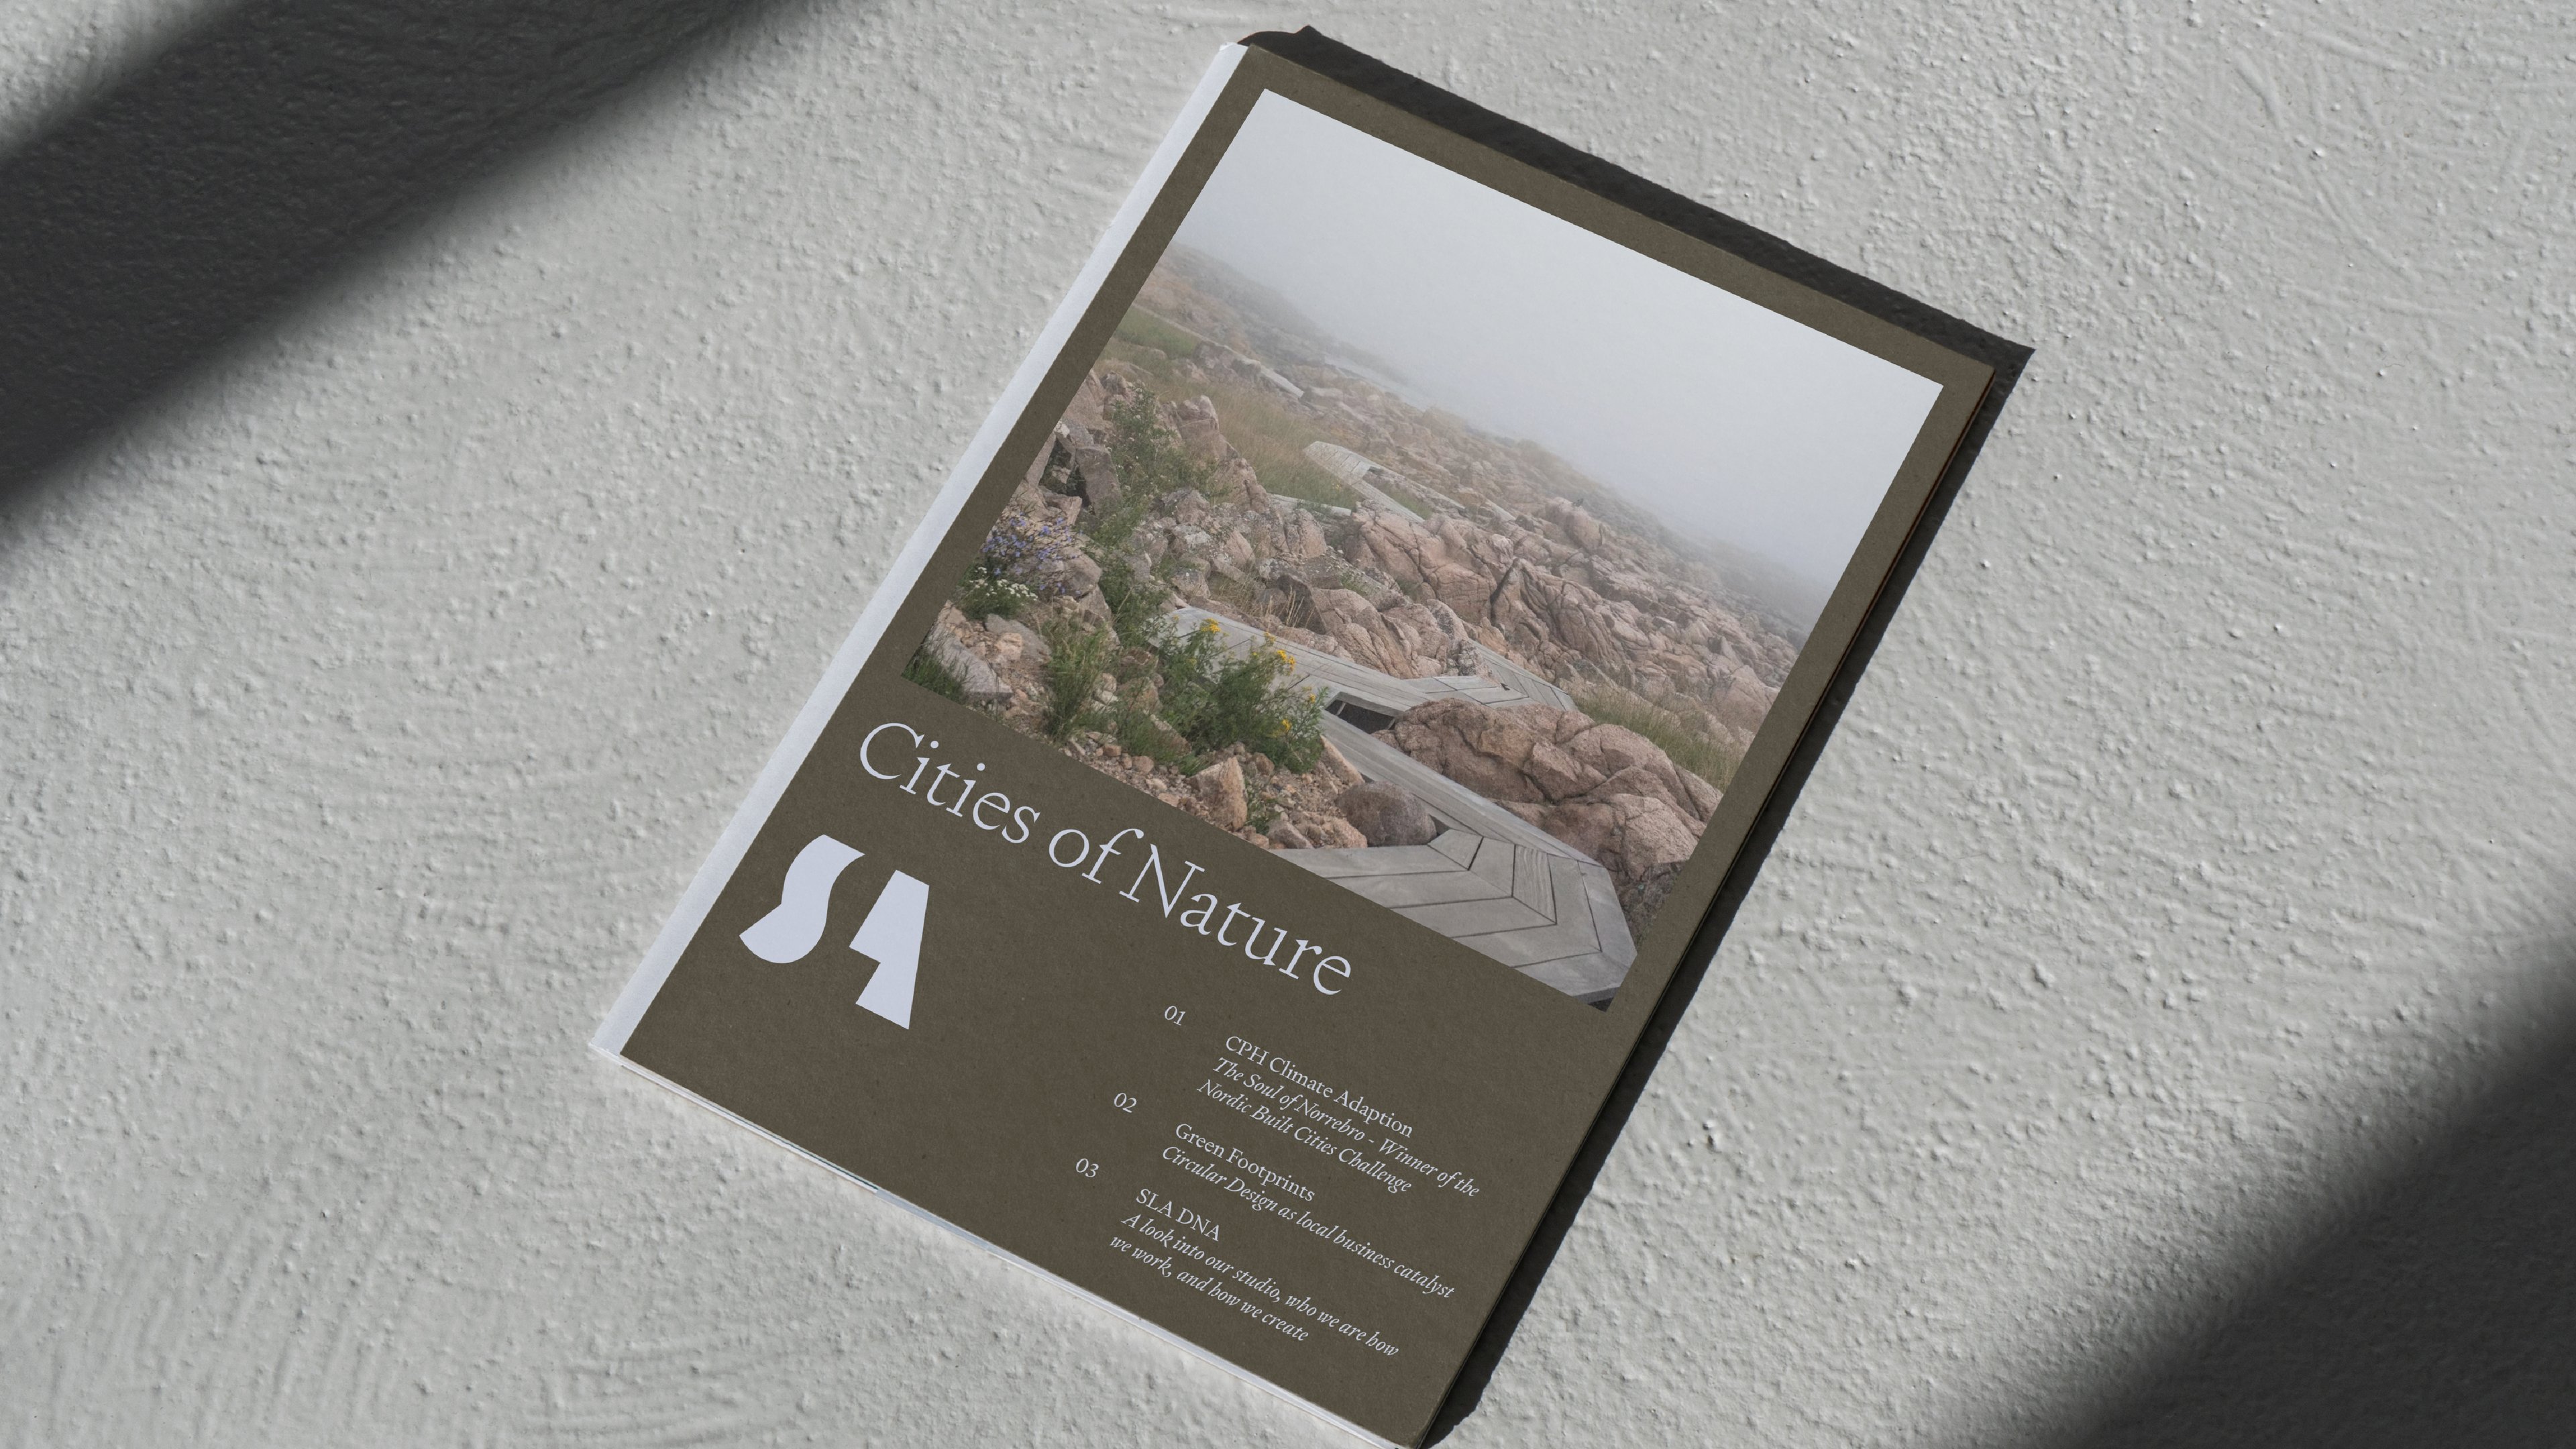 An identity that feels and functions like nature